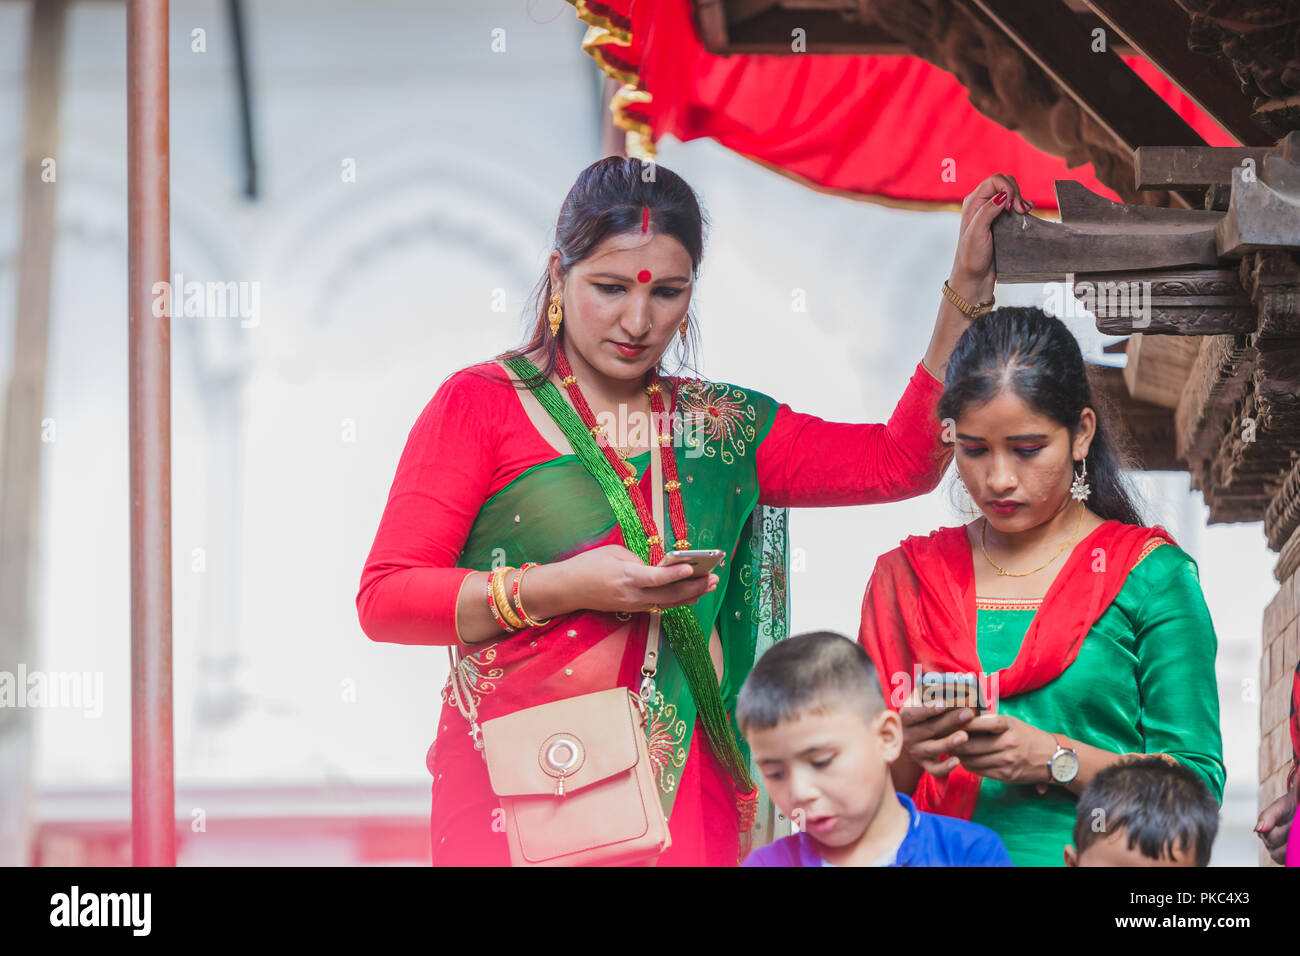 Kathmandu,Nepal - Sep 12,2018:Nepali Hindu Women using mobiles at Kathmandu Durbar Square in Kathmandu. Hindu Nepali Women fast and wish for a prosperous life of their spouse and family on this festival.The festivals for women, include dancing, singing, getting together with friends,, wearing red, green or orange clothes, sharing festive foods Credit: Nabaraj Regmi/Alamy Live News Stock Photo